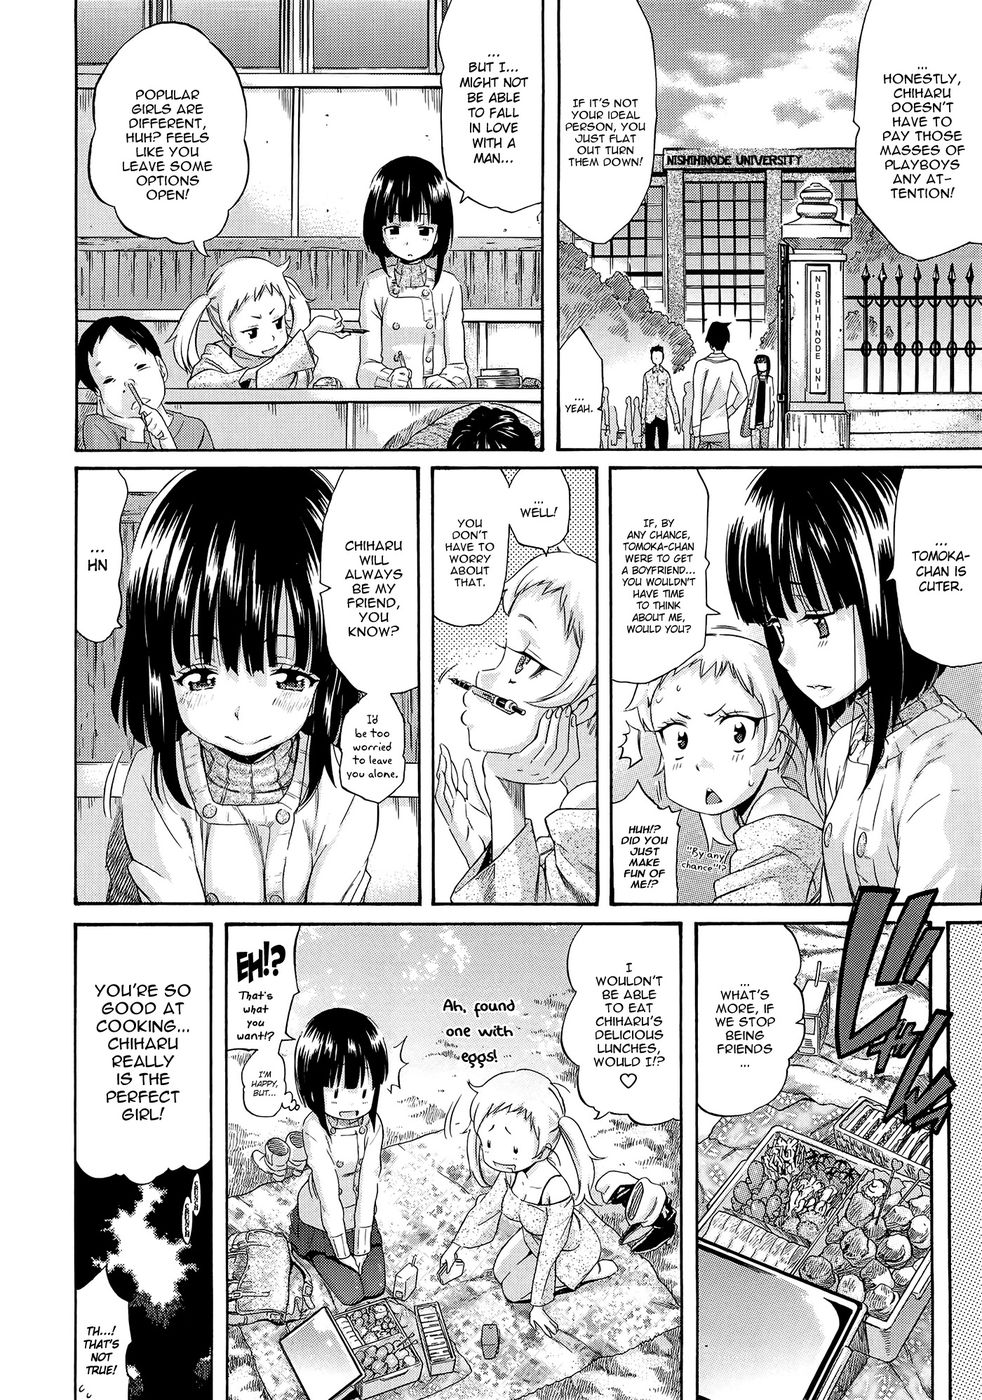 Hentai Manga Comic-Melody-Chapter 2-Cry For The Moon Relationship-2